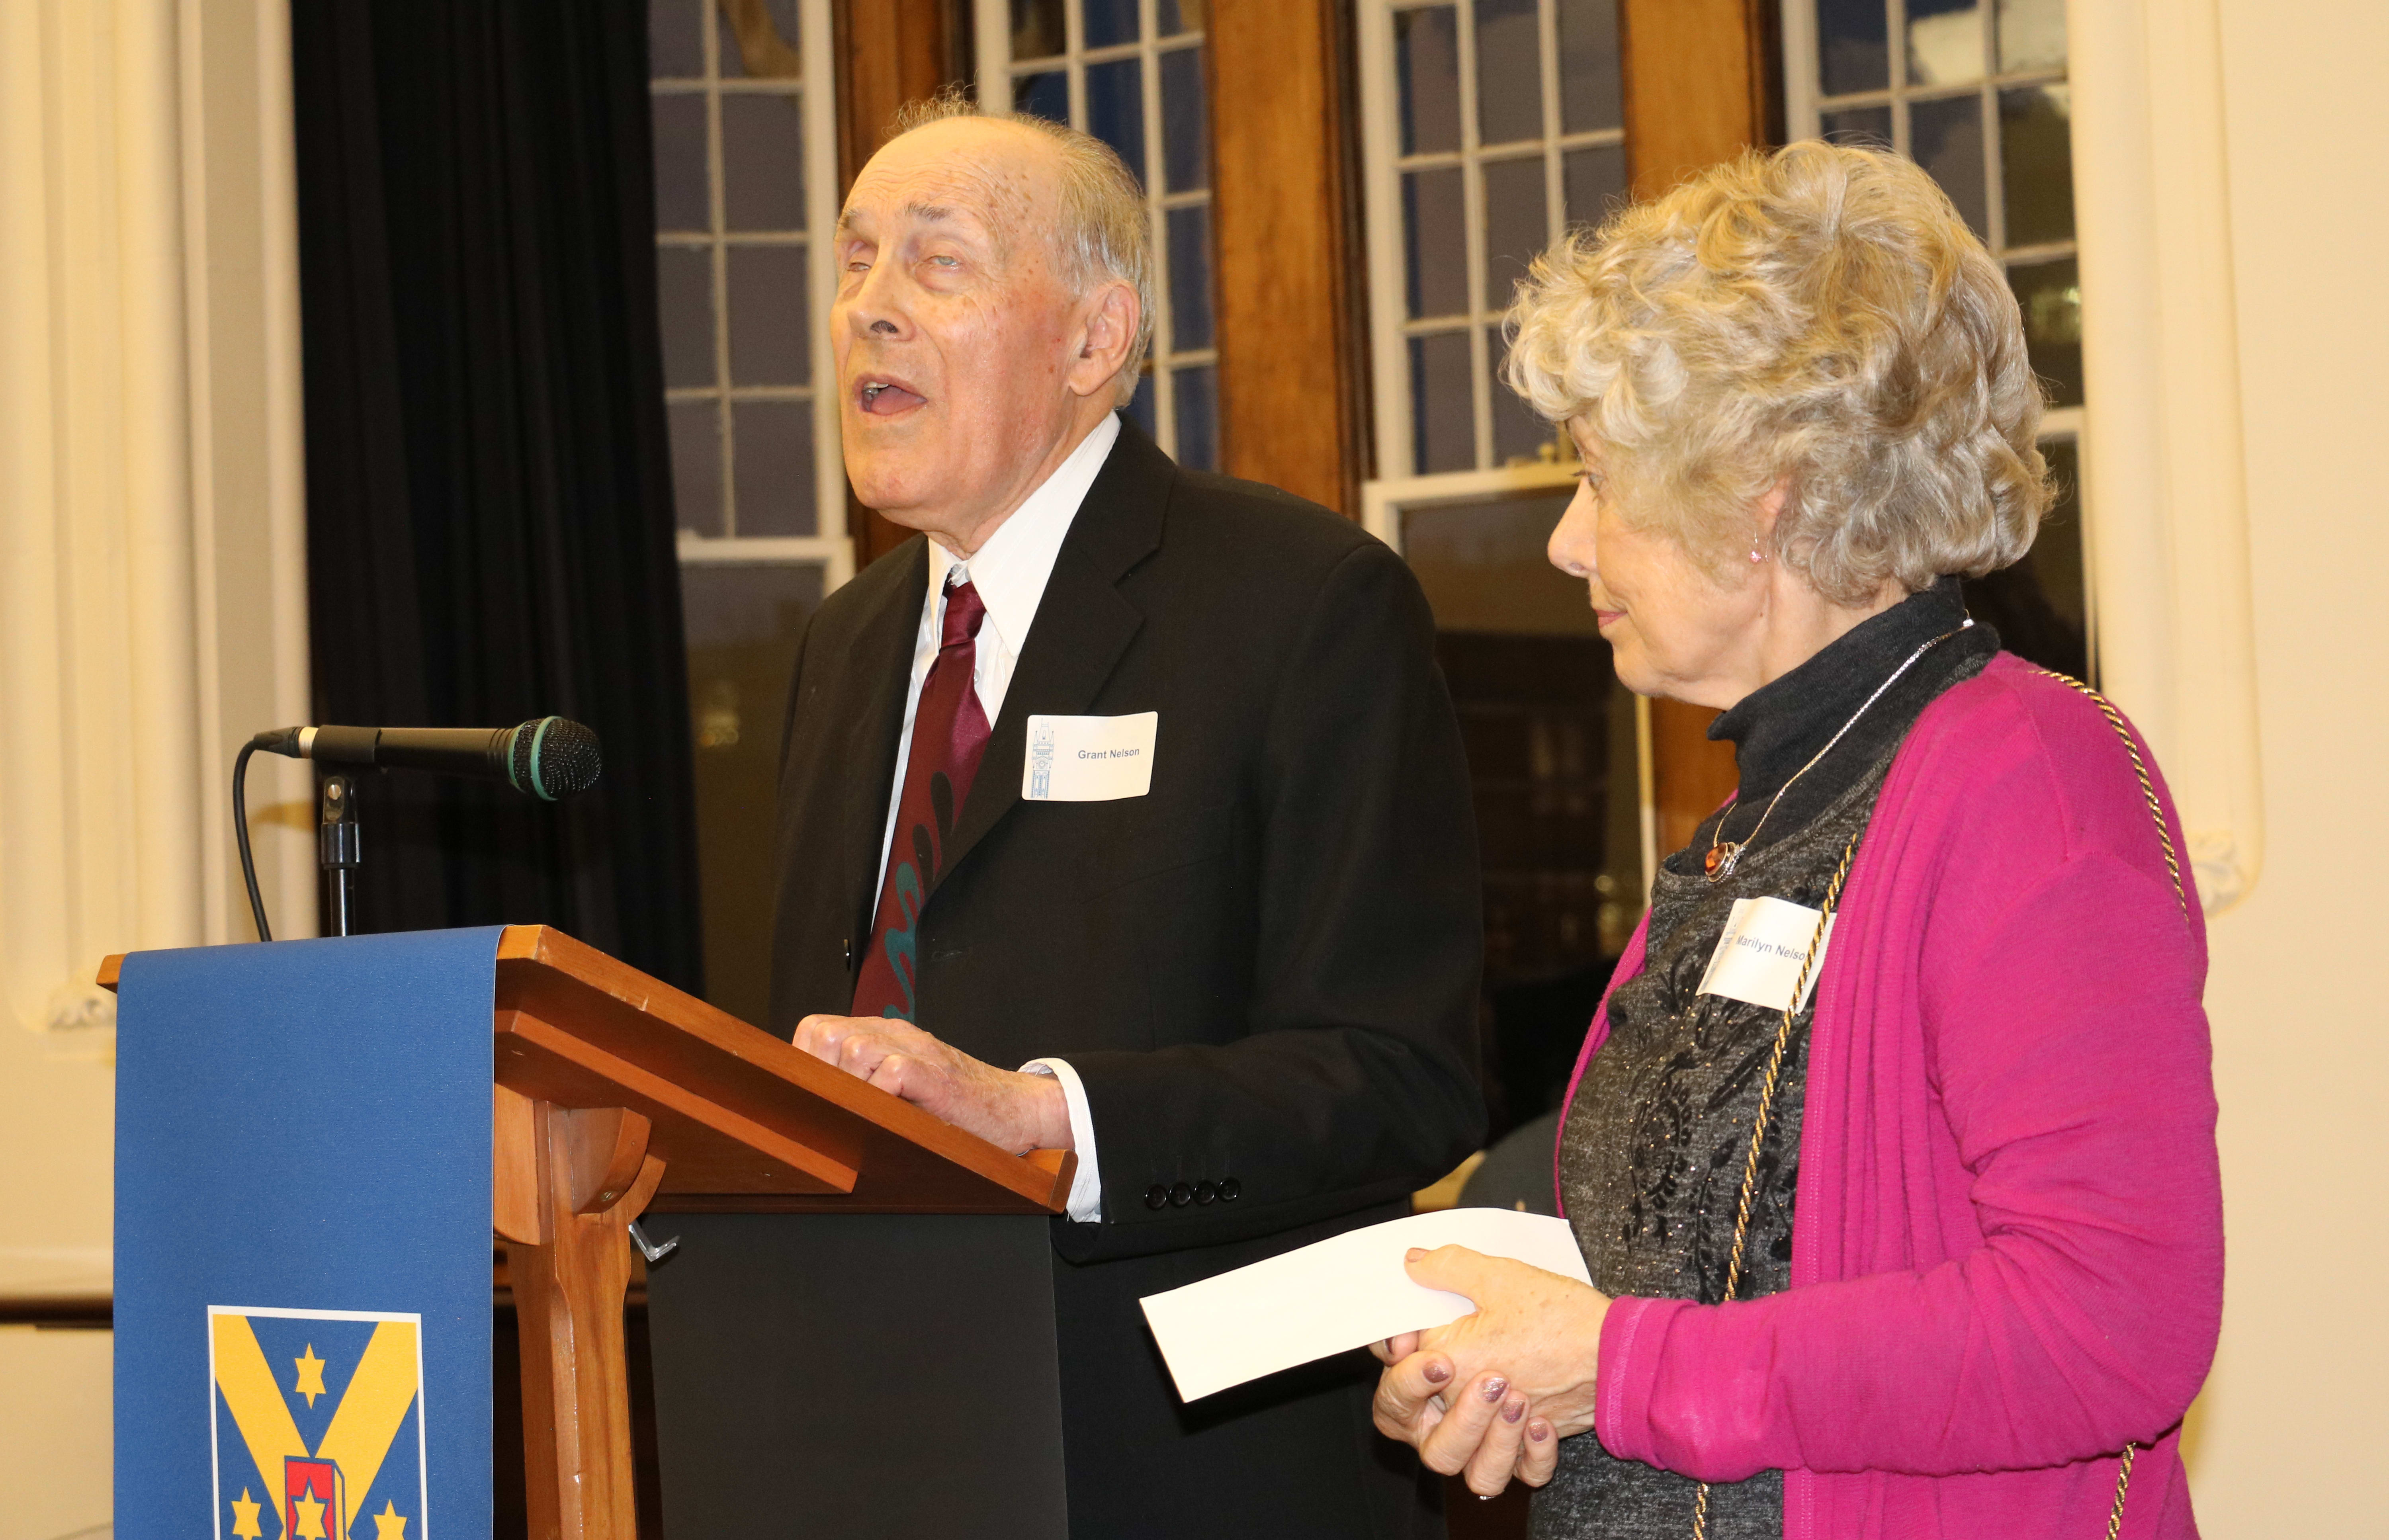 Christchurch philanthropists Grant and Marilyn Nelson